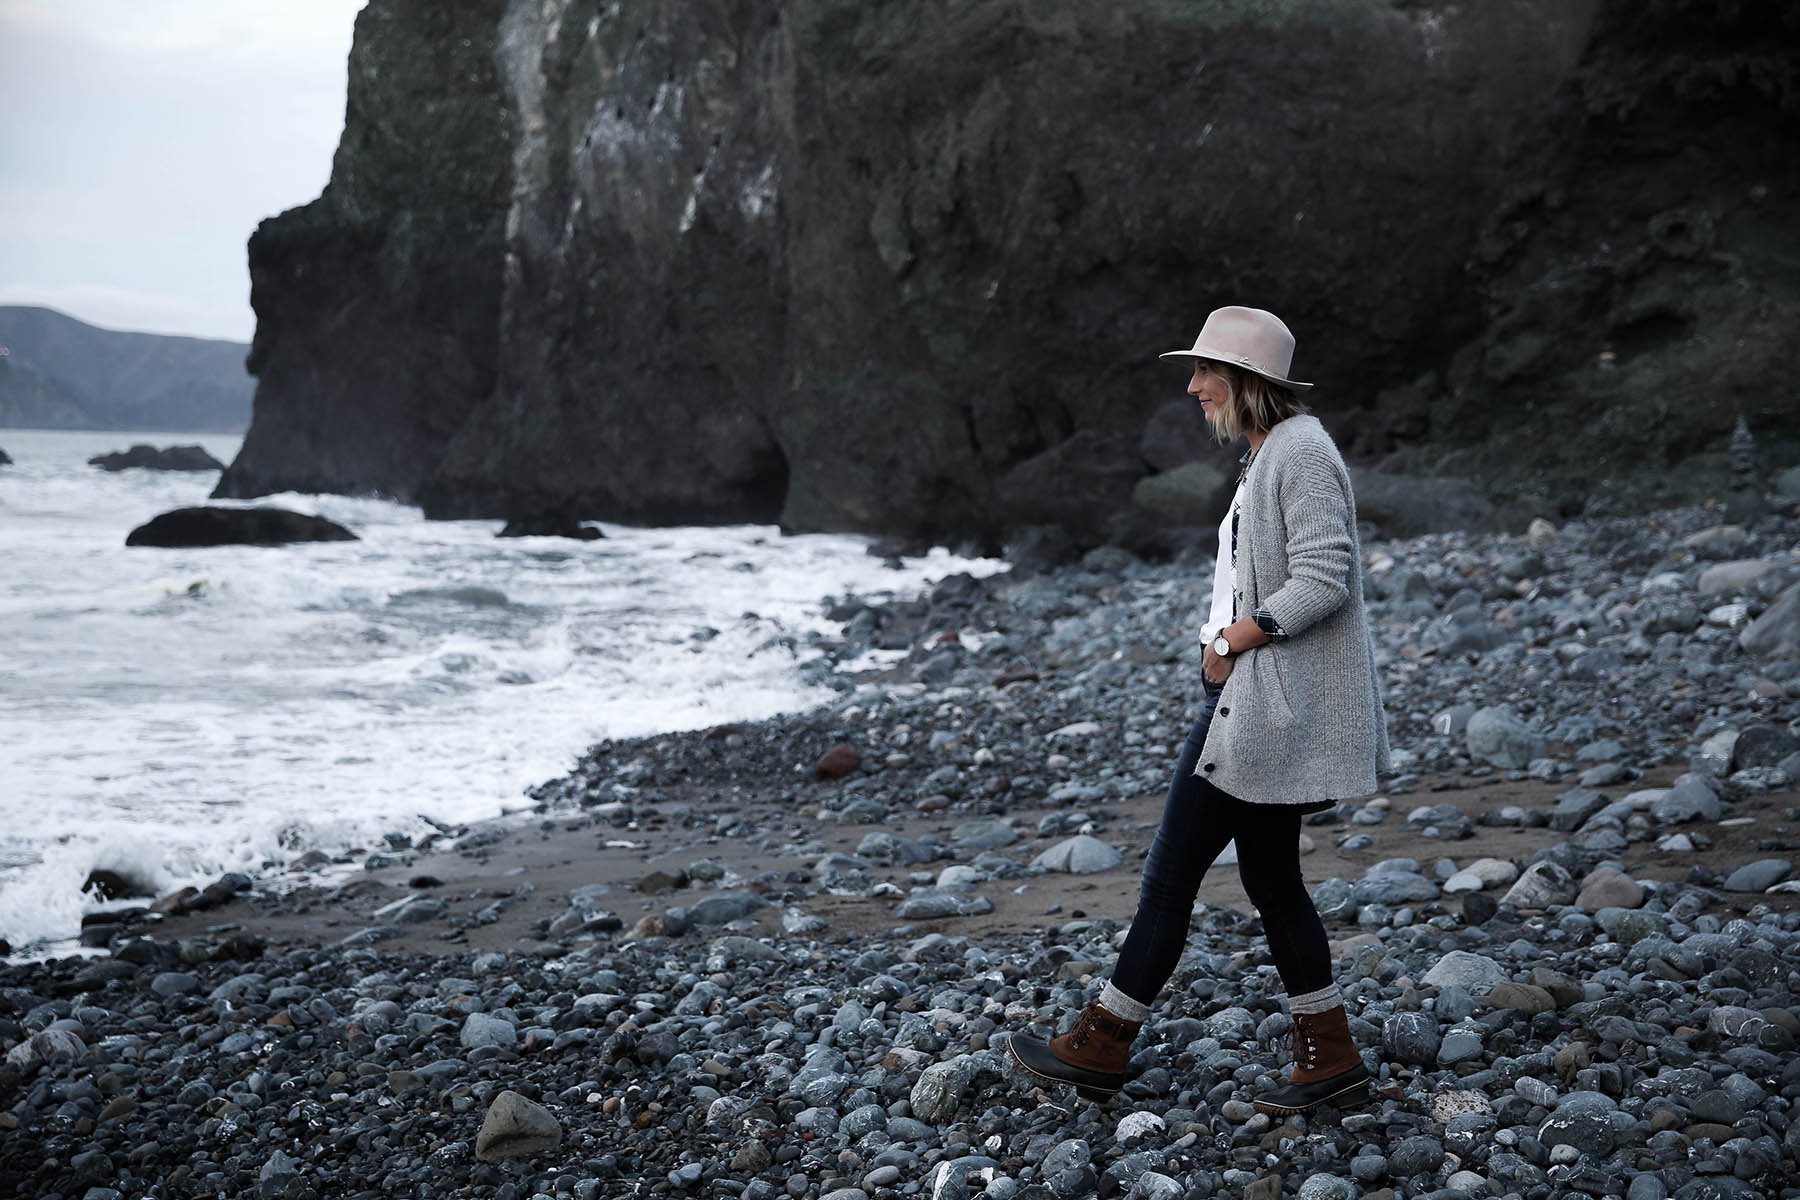 san francisco hikes on beach in sorel boots and grey cardigan